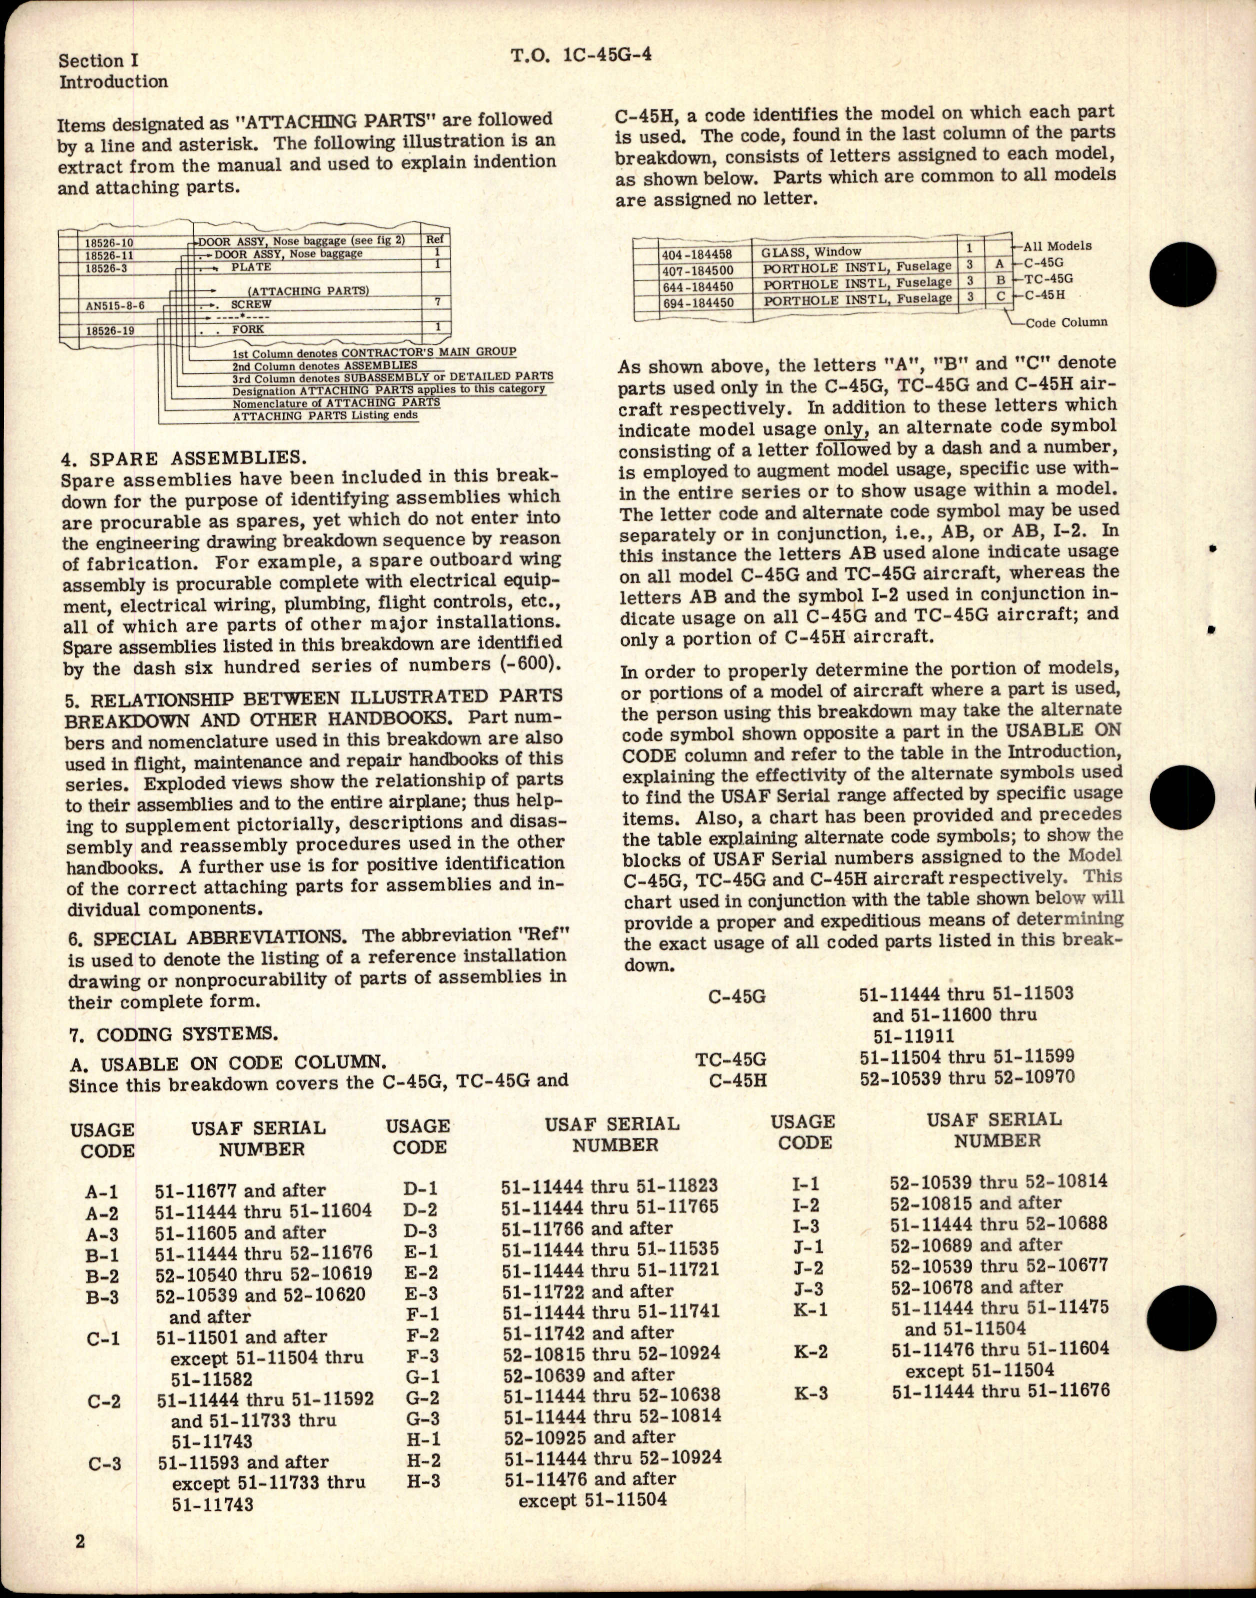 Sample page 8 from AirCorps Library document: Illustrated Parts Breakdown for C-45G, TC-45G, and C-45H